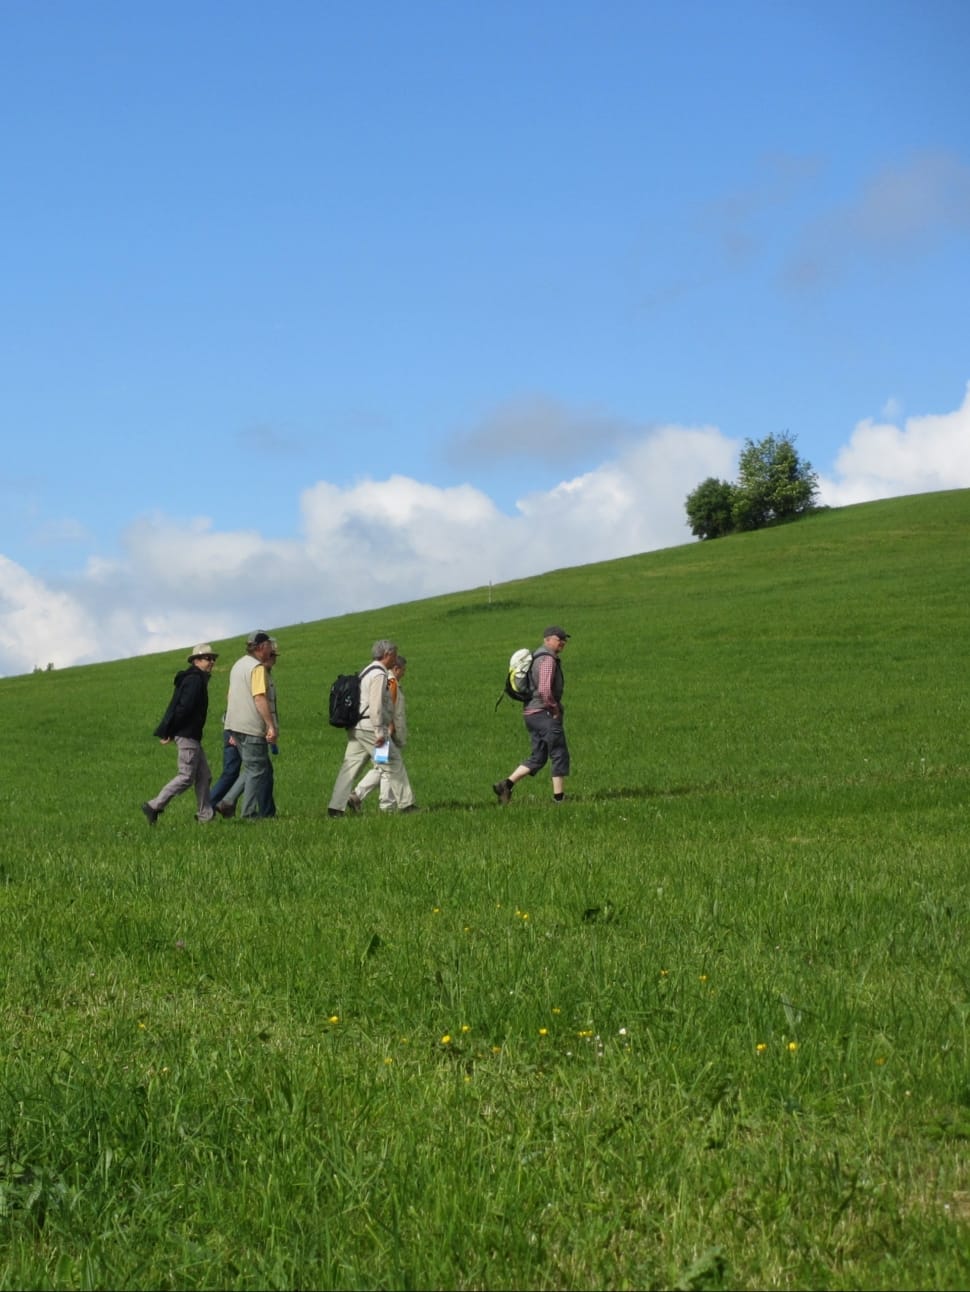 six people walking on green grass field at day time preview